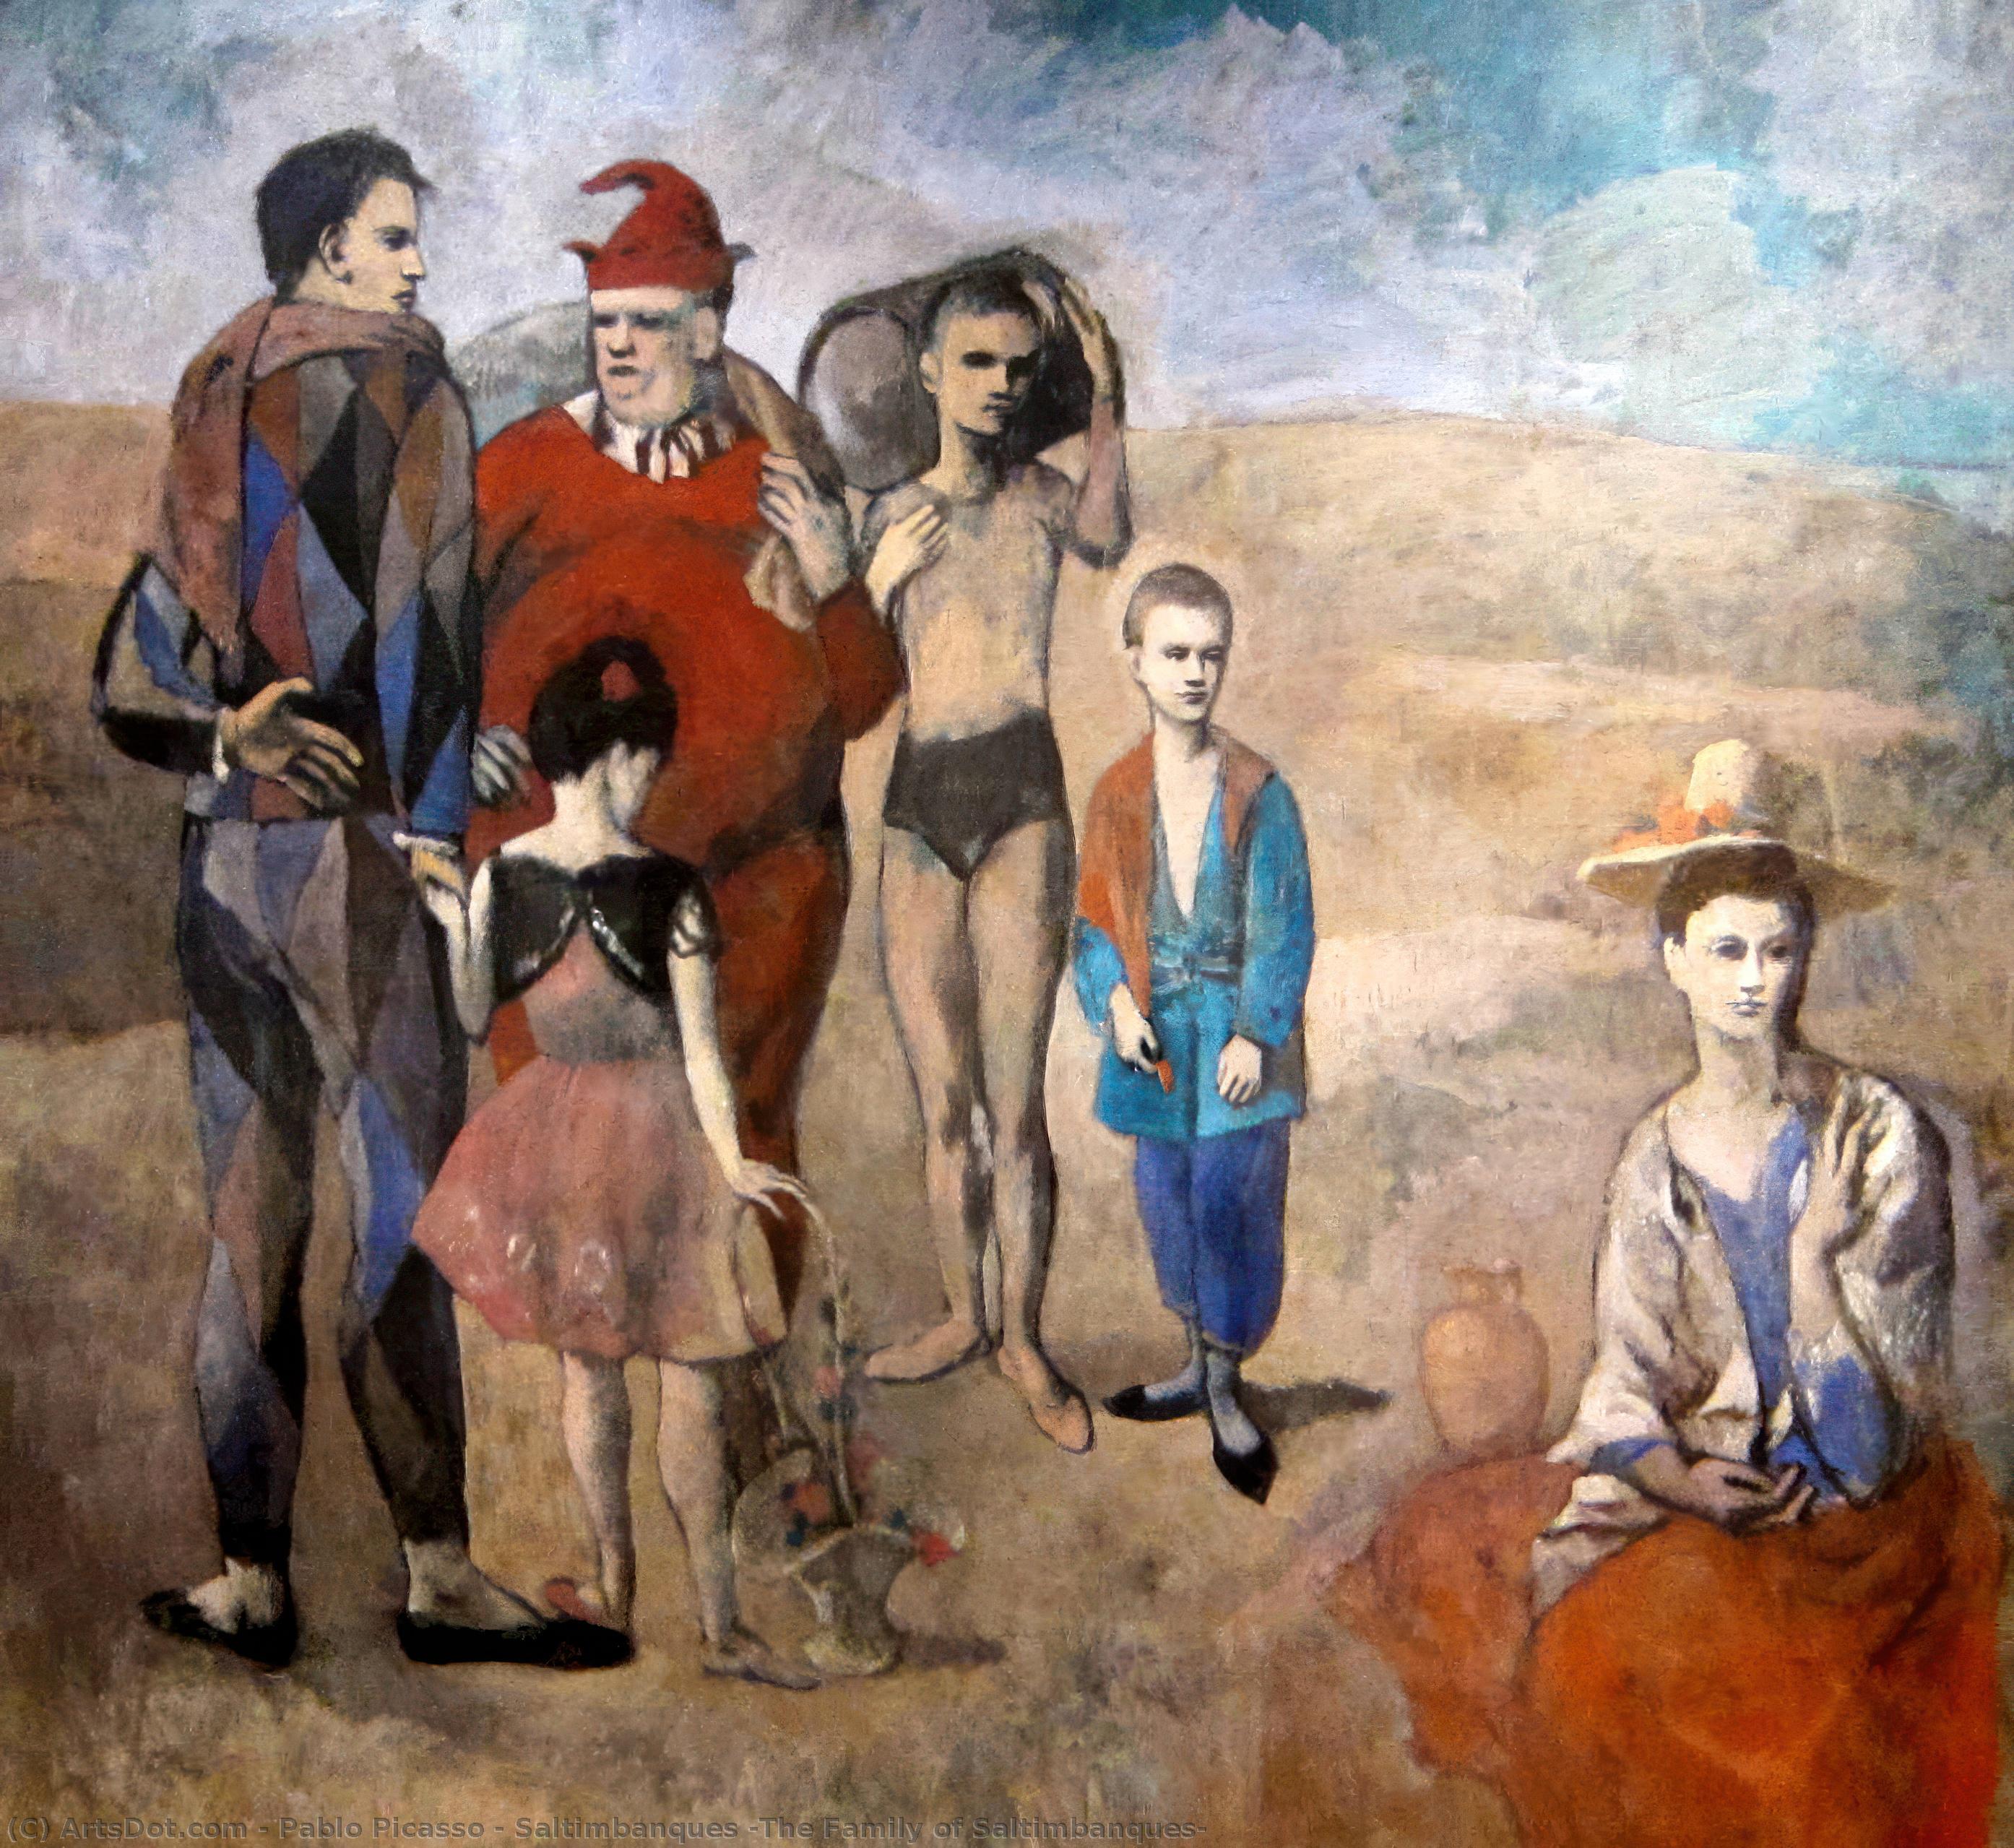 WikiOO.org – 美術百科全書 - 繪畫，作品 Pablo Picasso - Saltimbanques ( saltimbanques的家庭 )